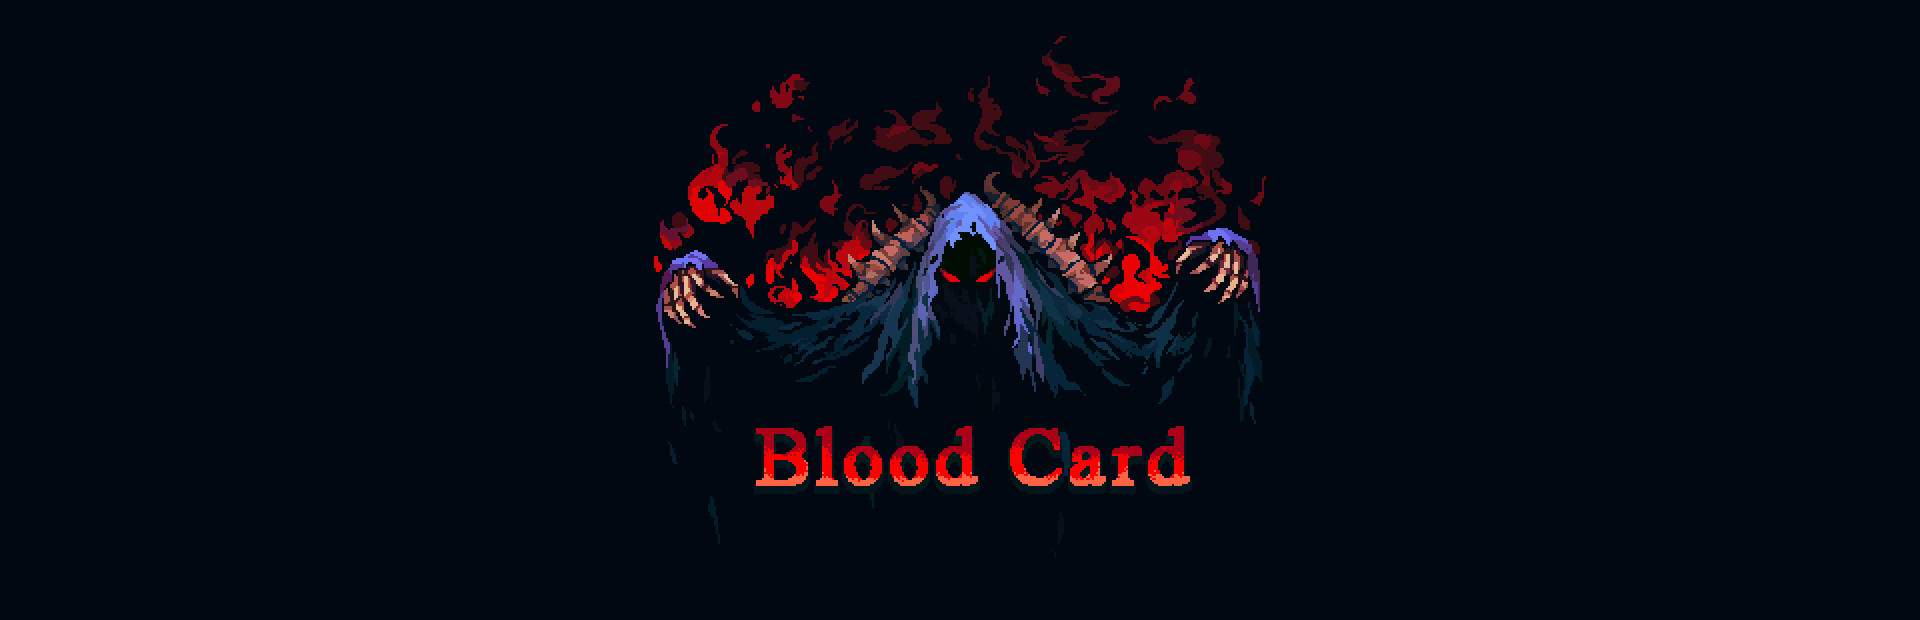 Blood Card cover image